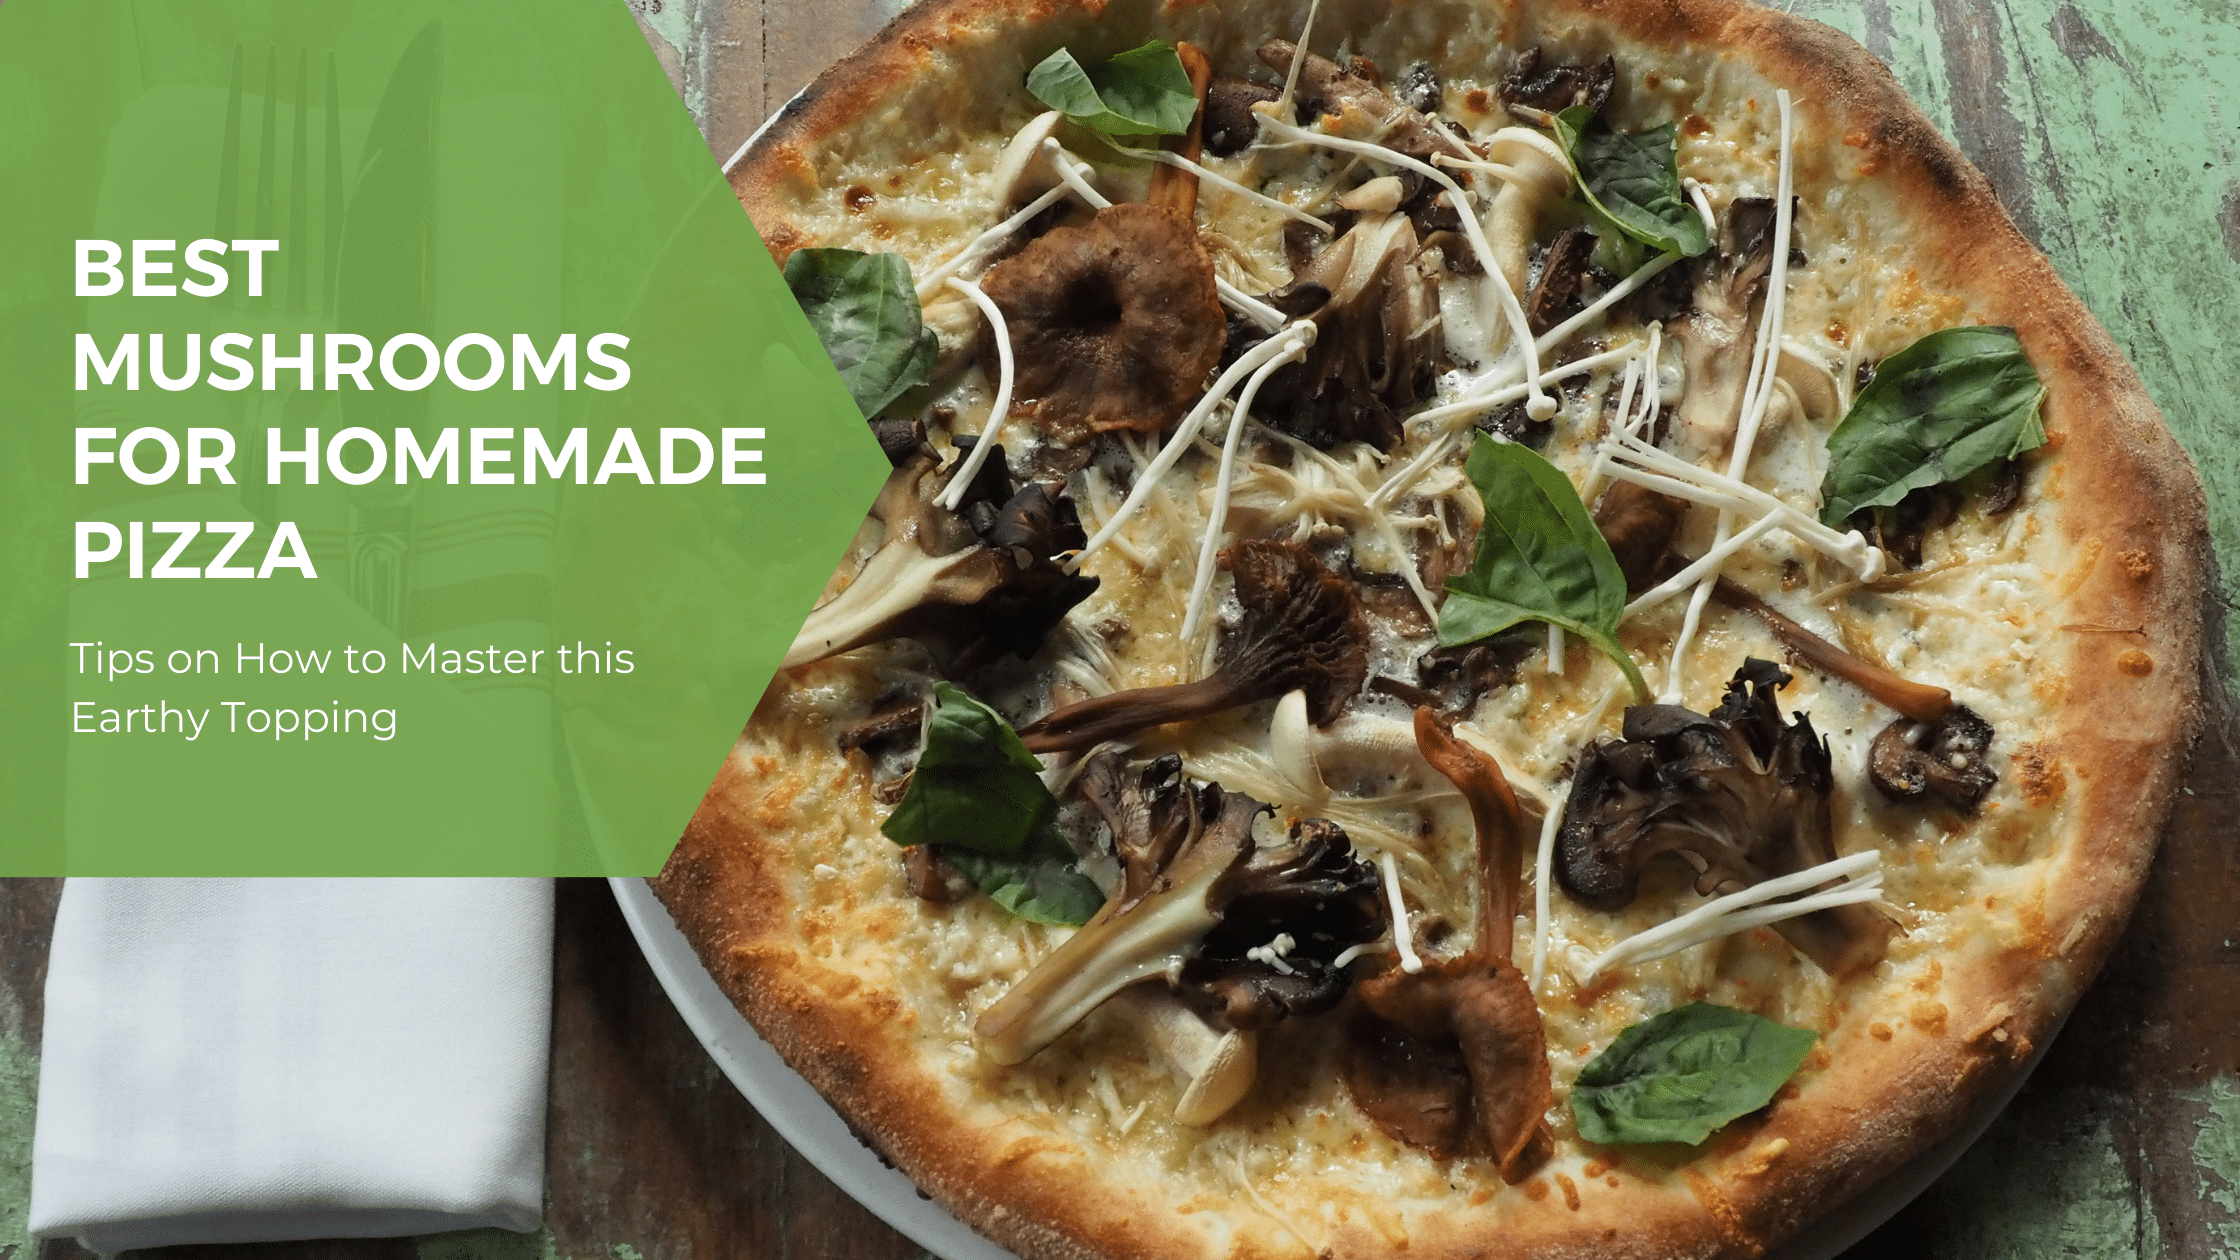 Best Mushrooms for Pizza (Tips on How to Make)